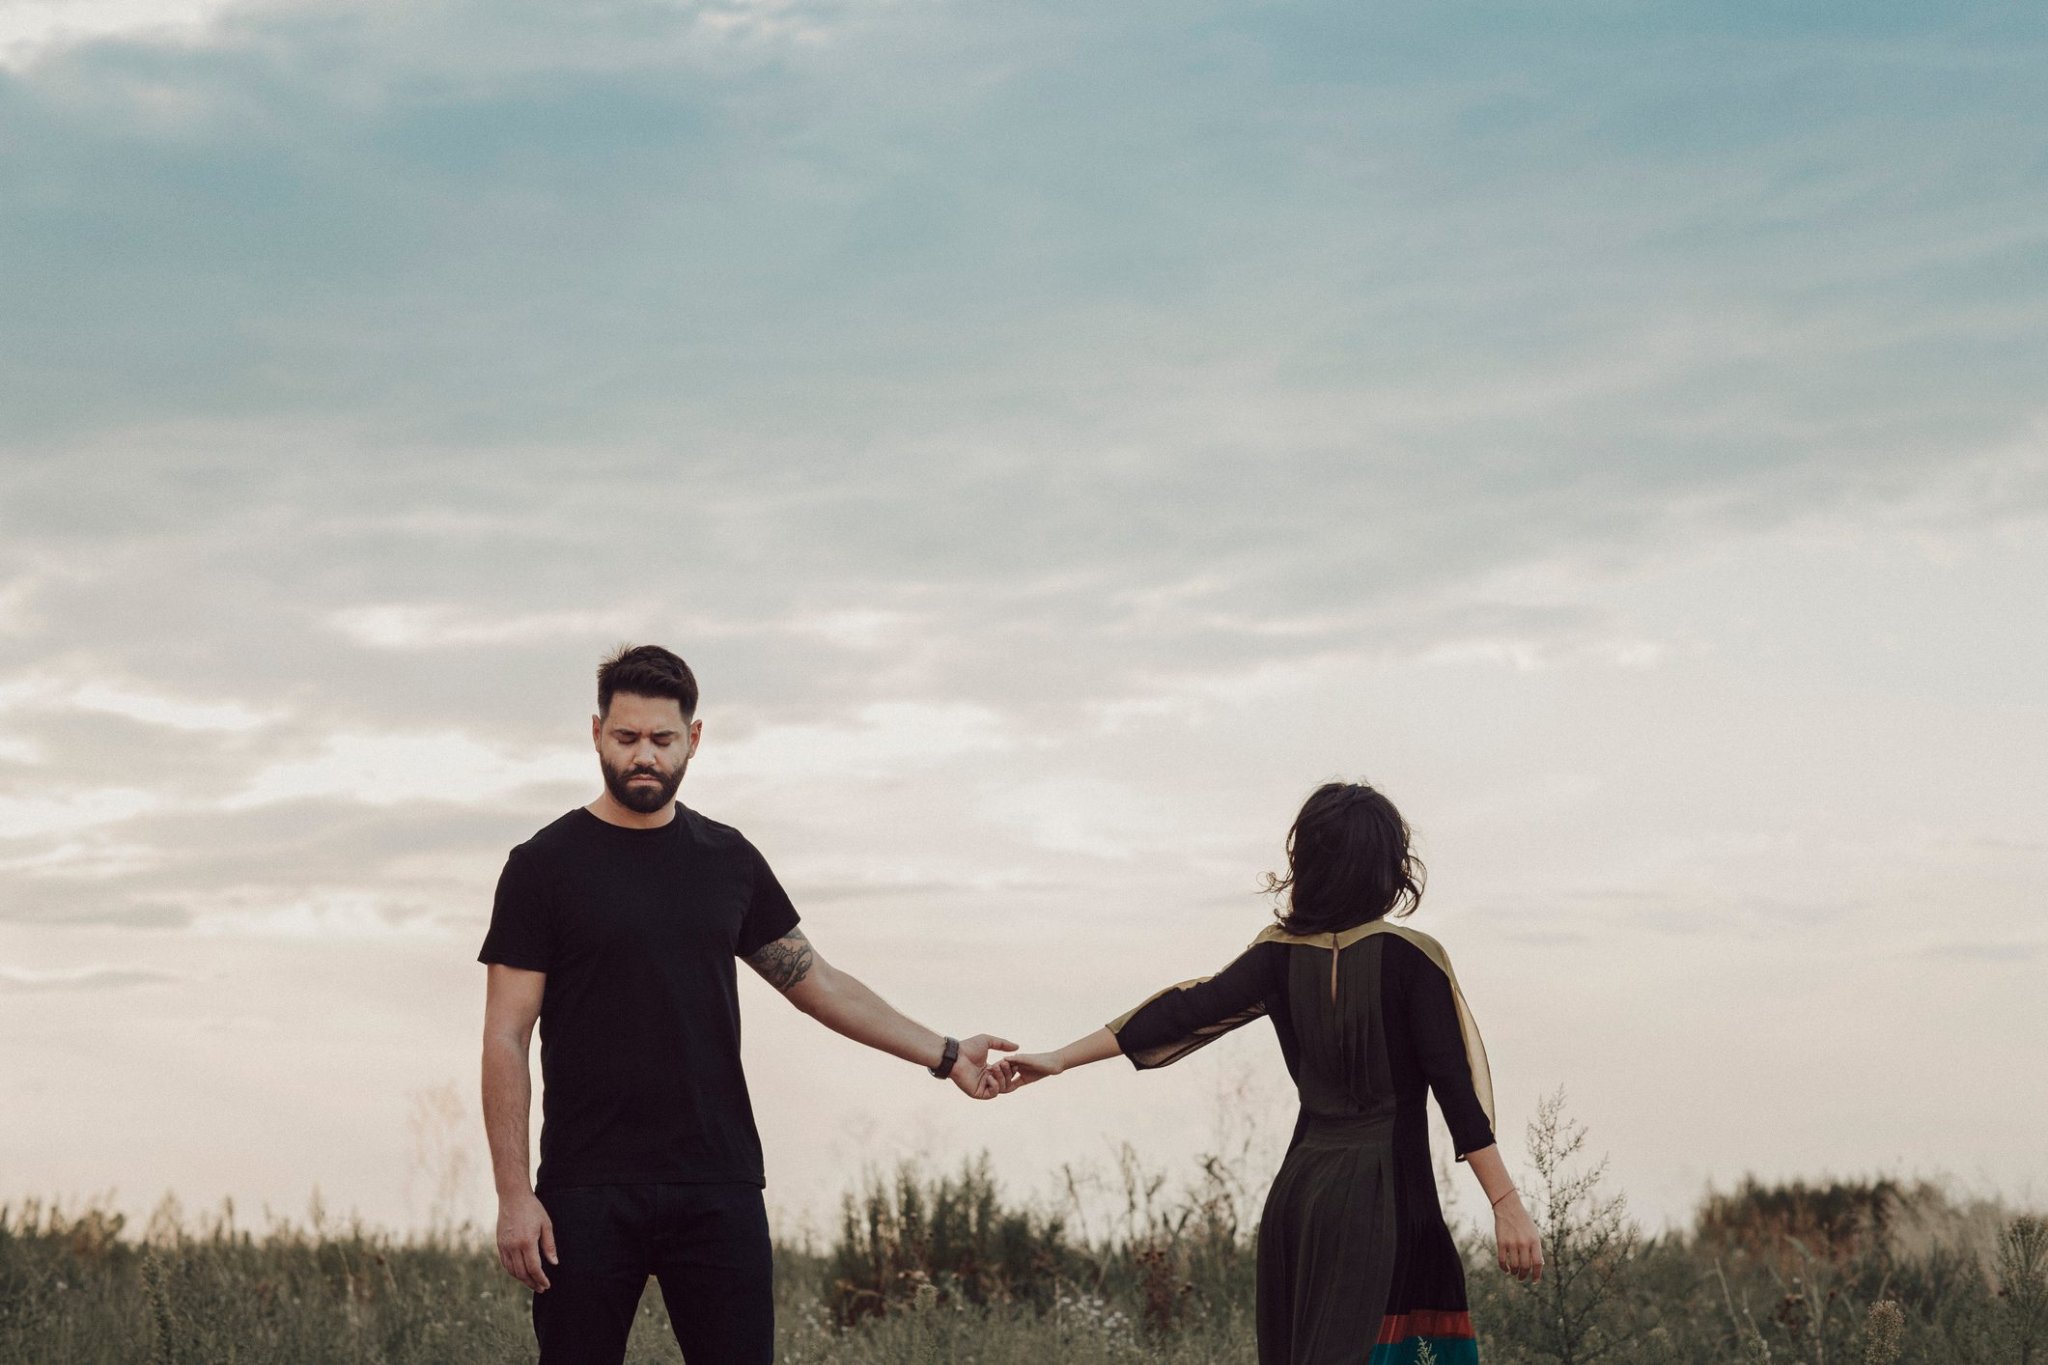 5 Relationship Deal Breakers That Suggest It’s Time to Move on